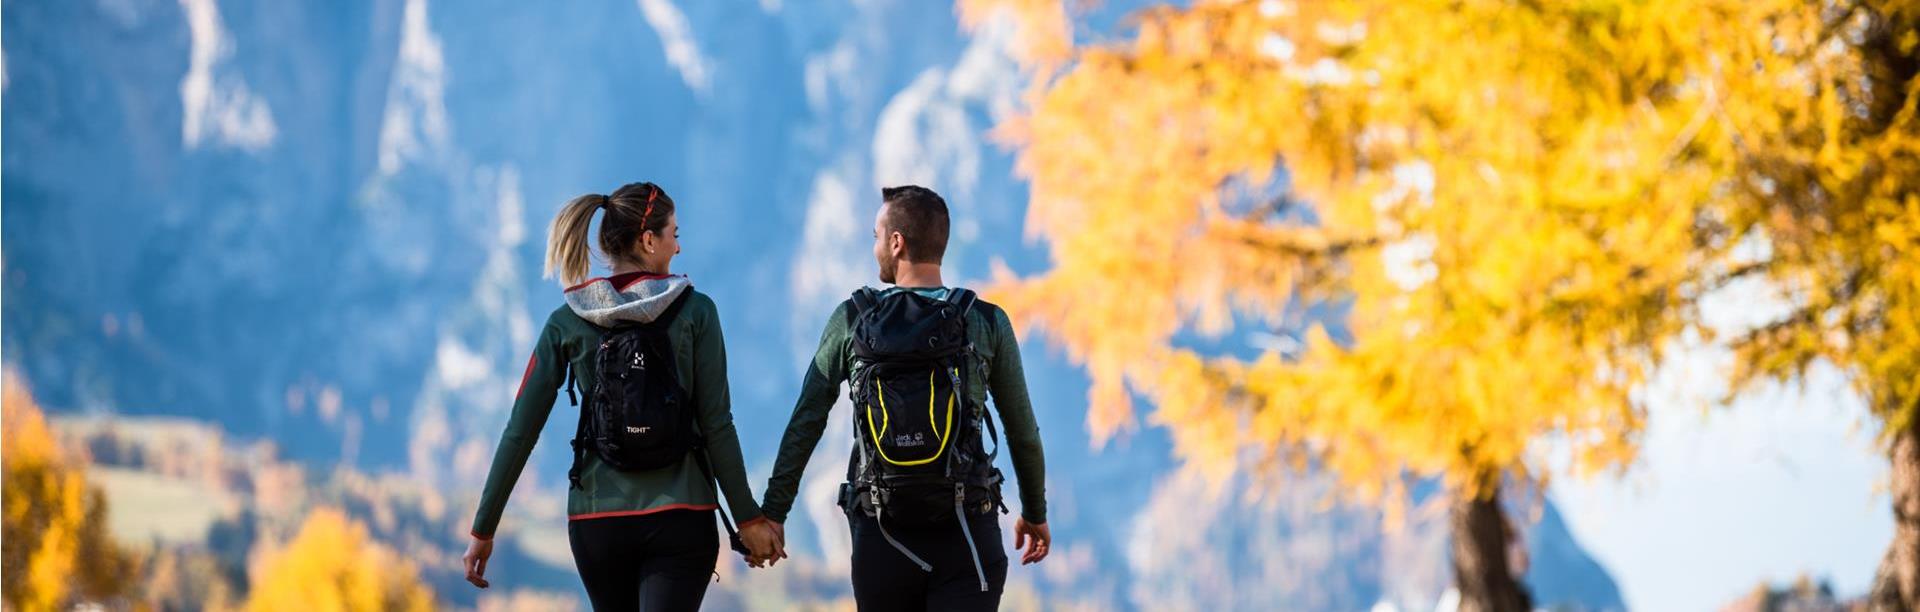 A couple hiking in autumn